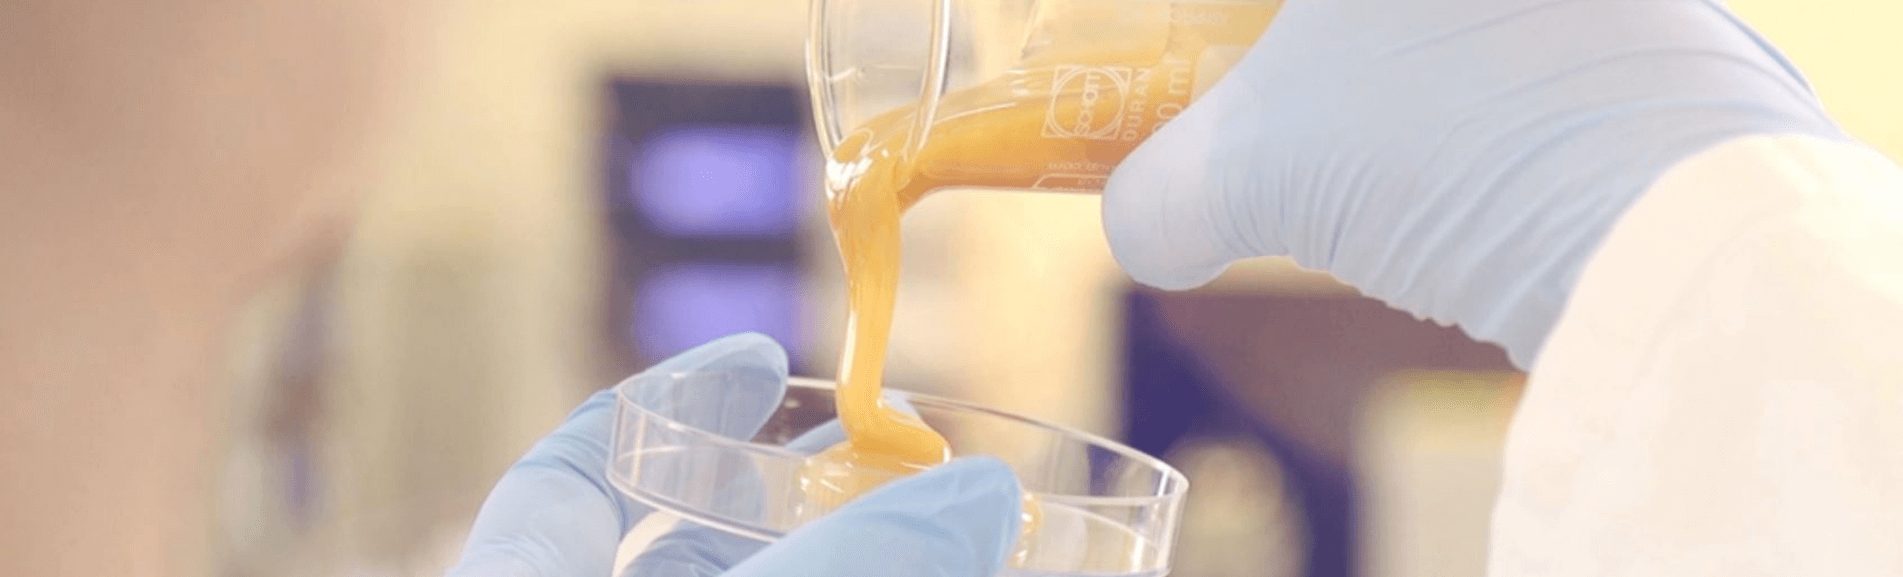 A scientist checking the quality of manuka honey by looking at its texture while flowing down honey from test-tube to watch glass.